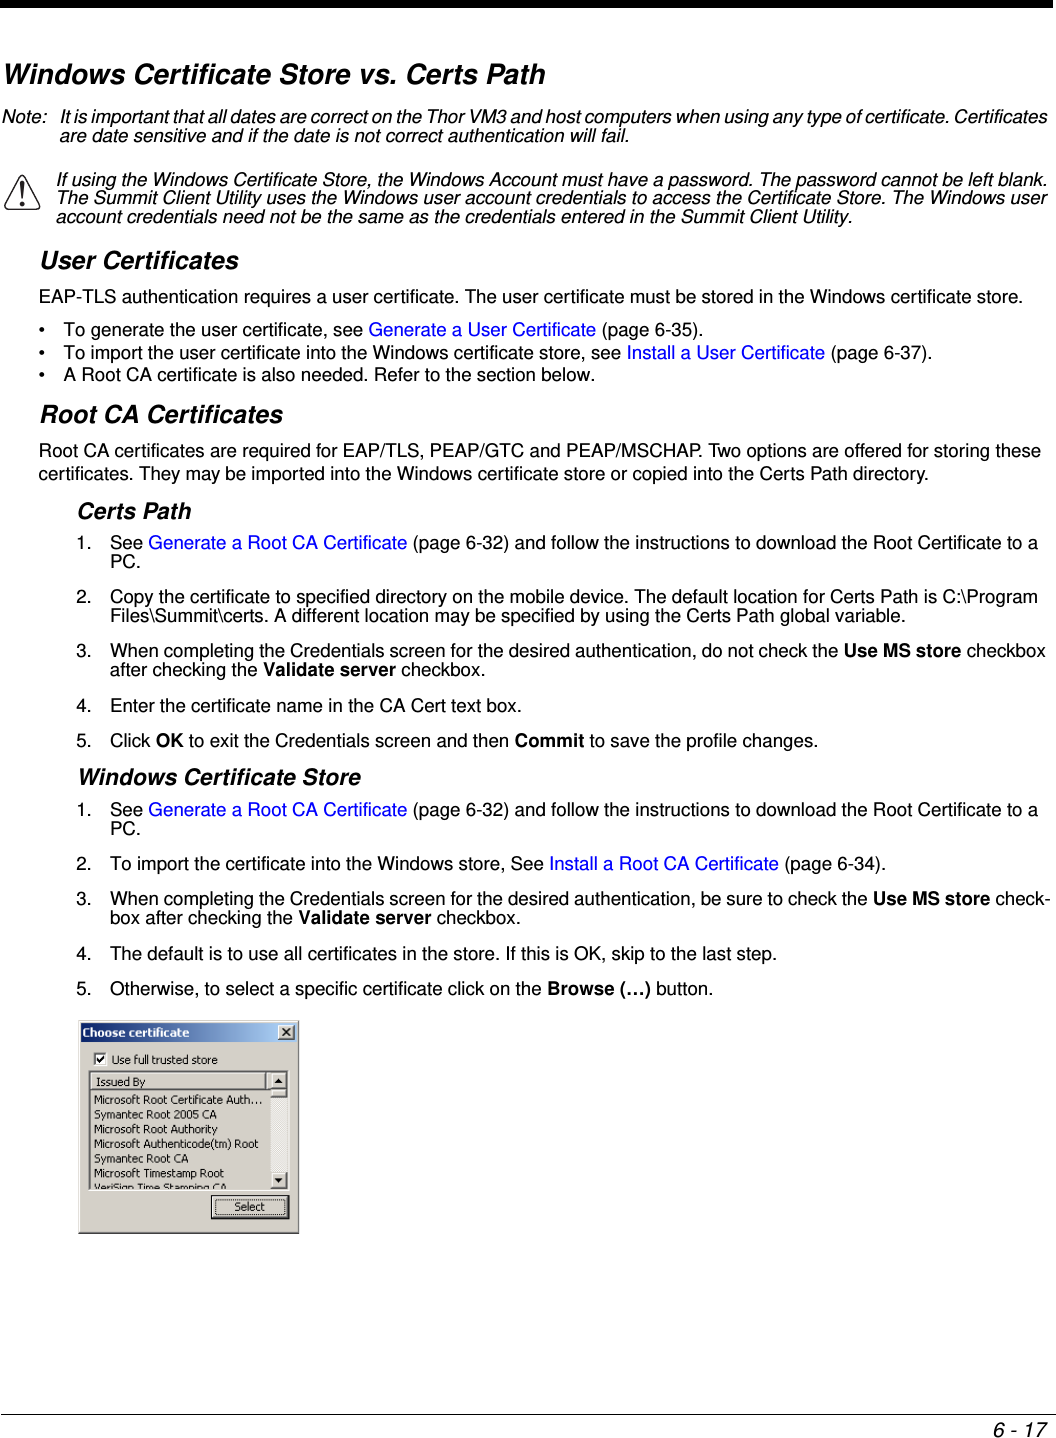 6 - 17Windows Certificate Store vs. Certs PathNote: It is important that all dates are correct on the Thor VM3 and host computers when using any type of certificate. Certificates are date sensitive and if the date is not correct authentication will fail.User CertificatesEAP-TLS authentication requires a user certificate. The user certificate must be stored in the Windows certificate store.• To generate the user certificate, see Generate a User Certificate (page 6-35).• To import the user certificate into the Windows certificate store, see Install a User Certificate (page 6-37).• A Root CA certificate is also needed. Refer to the section below.Root CA CertificatesRoot CA certificates are required for EAP/TLS, PEAP/GTC and PEAP/MSCHAP. Two options are offered for storing these certificates. They may be imported into the Windows certificate store or copied into the Certs Path directory.Certs Path1. See Generate a Root CA Certificate (page 6-32) and follow the instructions to download the Root Certificate to a PC.2. Copy the certificate to specified directory on the mobile device. The default location for Certs Path is C:\Program Files\Summit\certs. A different location may be specified by using the Certs Path global variable. 3. When completing the Credentials screen for the desired authentication, do not check the Use MS store checkbox after checking the Validate server checkbox.4. Enter the certificate name in the CA Cert text box.5. Click OK to exit the Credentials screen and then Commit to save the profile changes.Windows Certificate Store1. See Generate a Root CA Certificate (page 6-32) and follow the instructions to download the Root Certificate to a PC.2. To import the certificate into the Windows store, See Install a Root CA Certificate (page 6-34).3. When completing the Credentials screen for the desired authentication, be sure to check the Use MS store check-box after checking the Validate server checkbox.4. The default is to use all certificates in the store. If this is OK, skip to the last step.5. Otherwise, to select a specific certificate click on the Browse (…) button. If using the Windows Certificate Store, the Windows Account must have a password. The password cannot be left blank. The Summit Client Utility uses the Windows user account credentials to access the Certificate Store. The Windows user account credentials need not be the same as the credentials entered in the Summit Client Utility.!